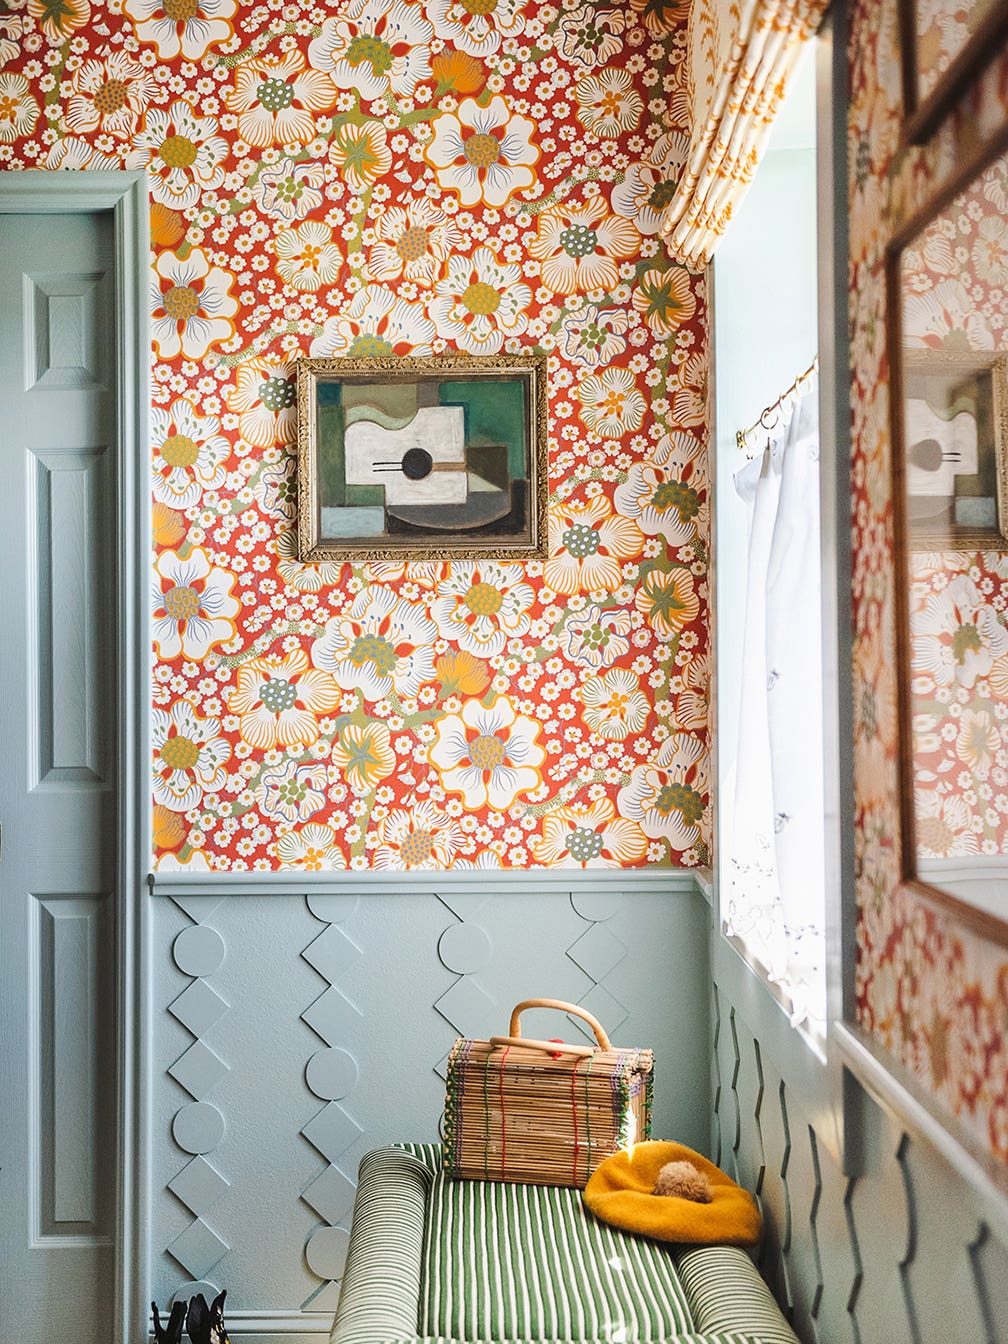 red wallpapered bathroom